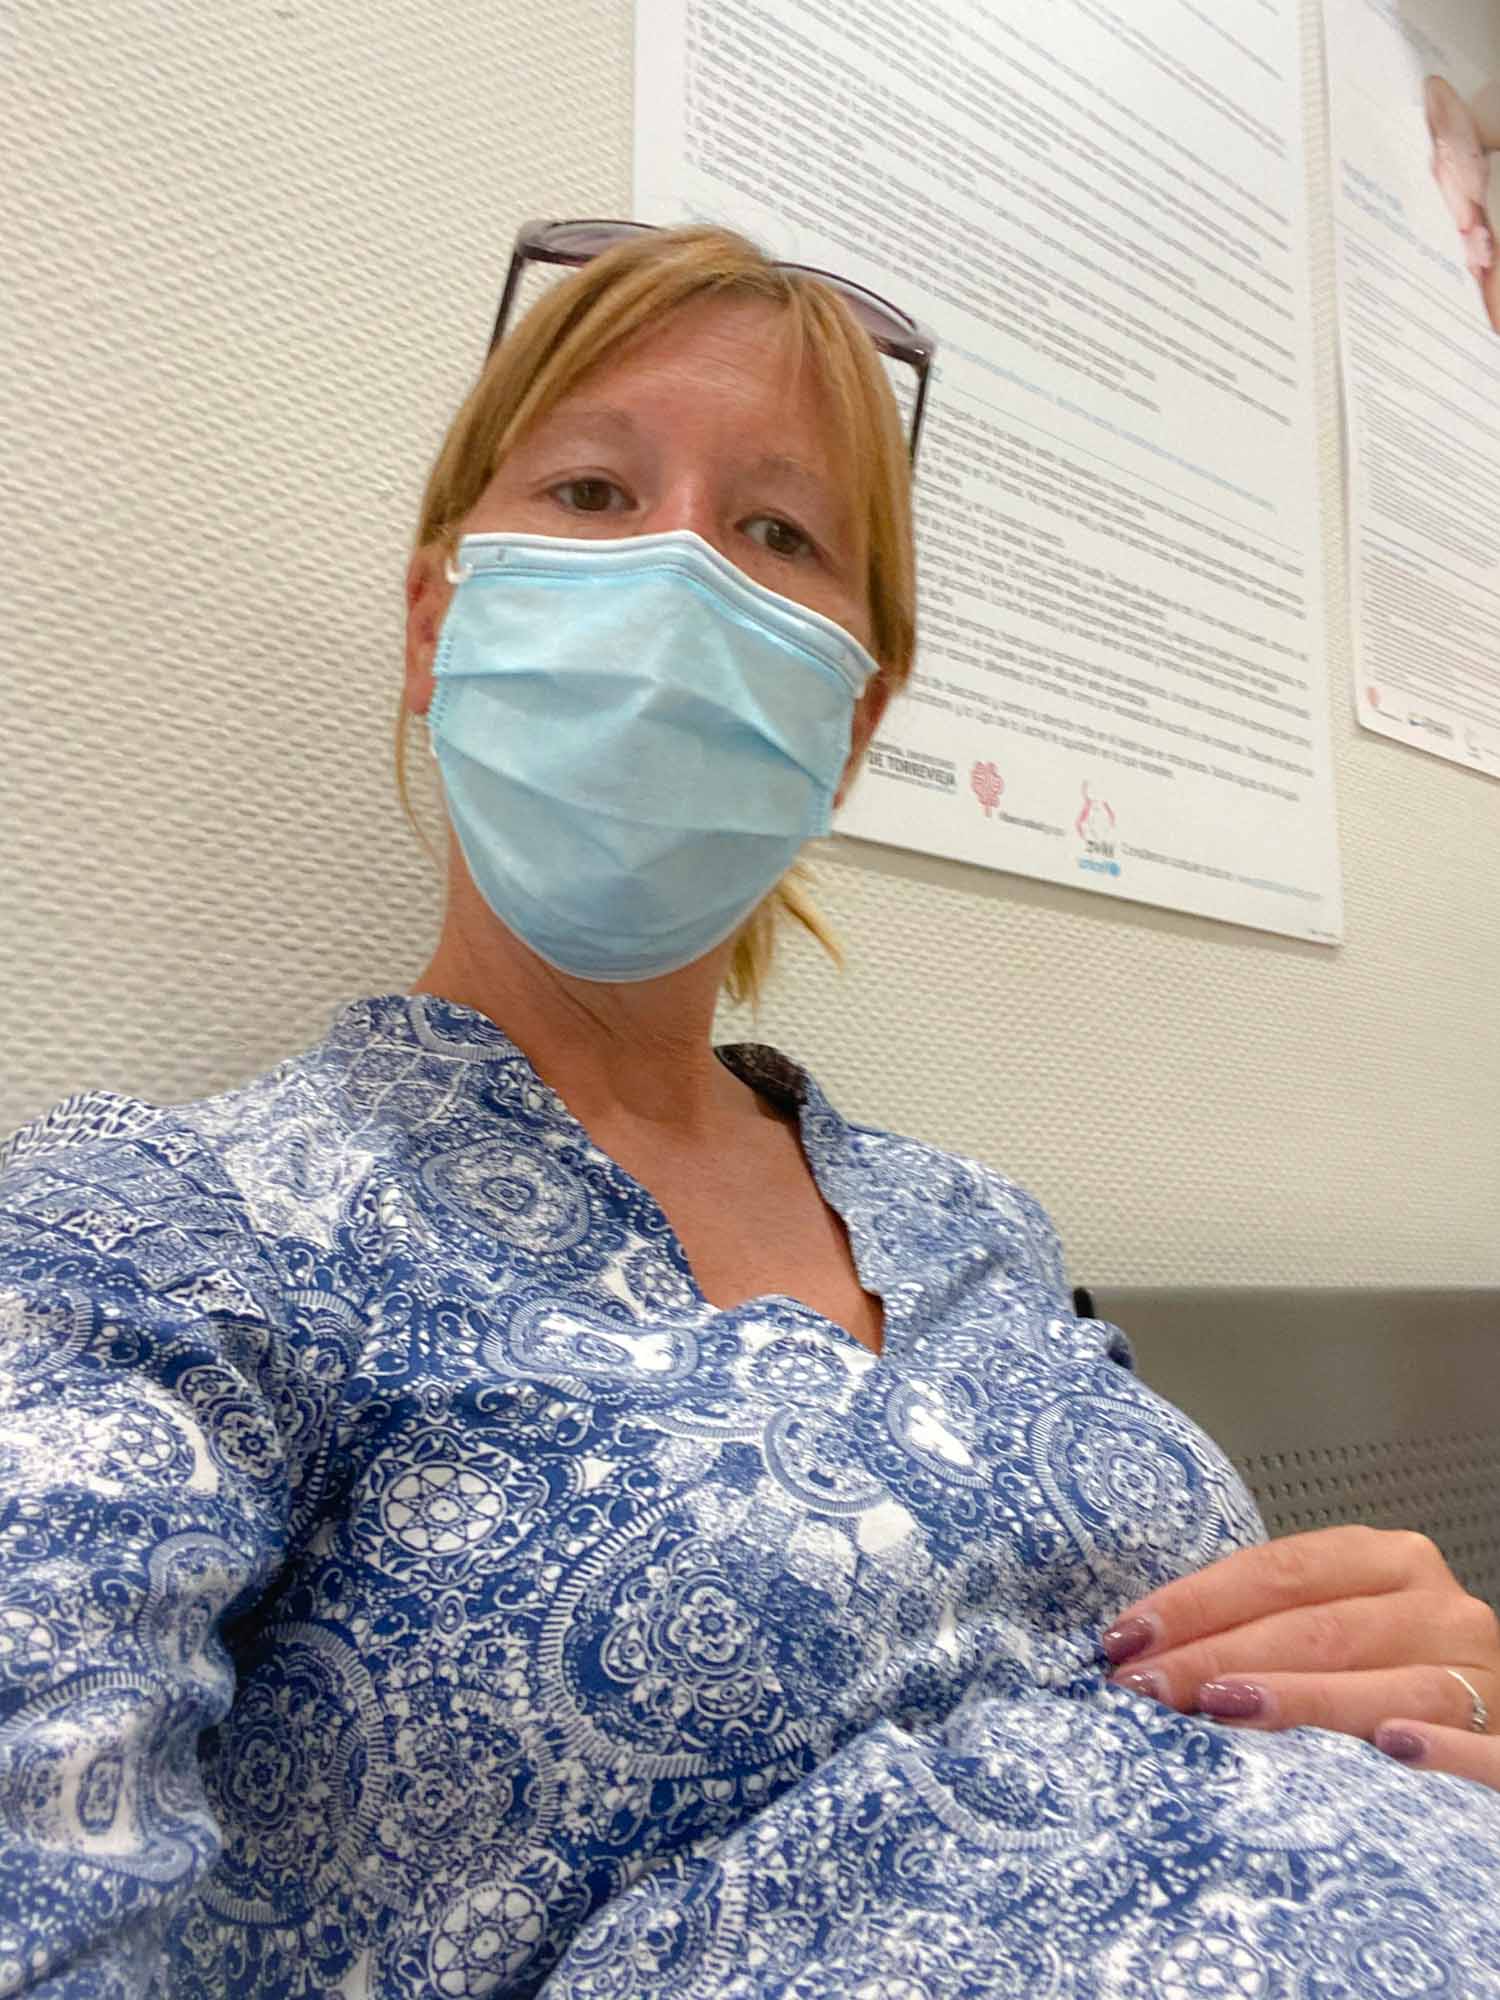 A pregnant woman sat wearing a medical facemask